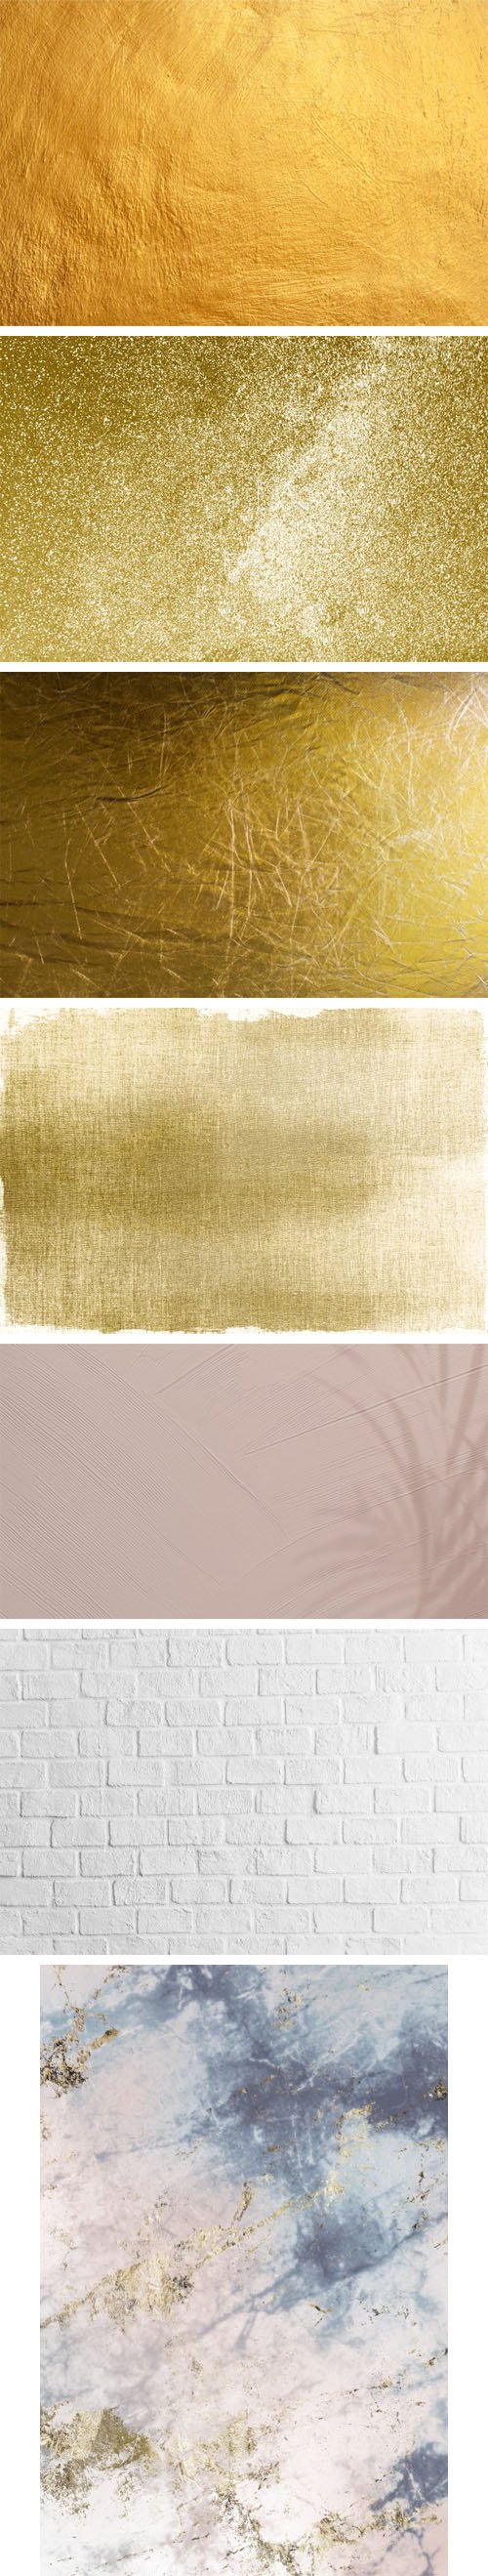 7 Various Textured Backgrounds